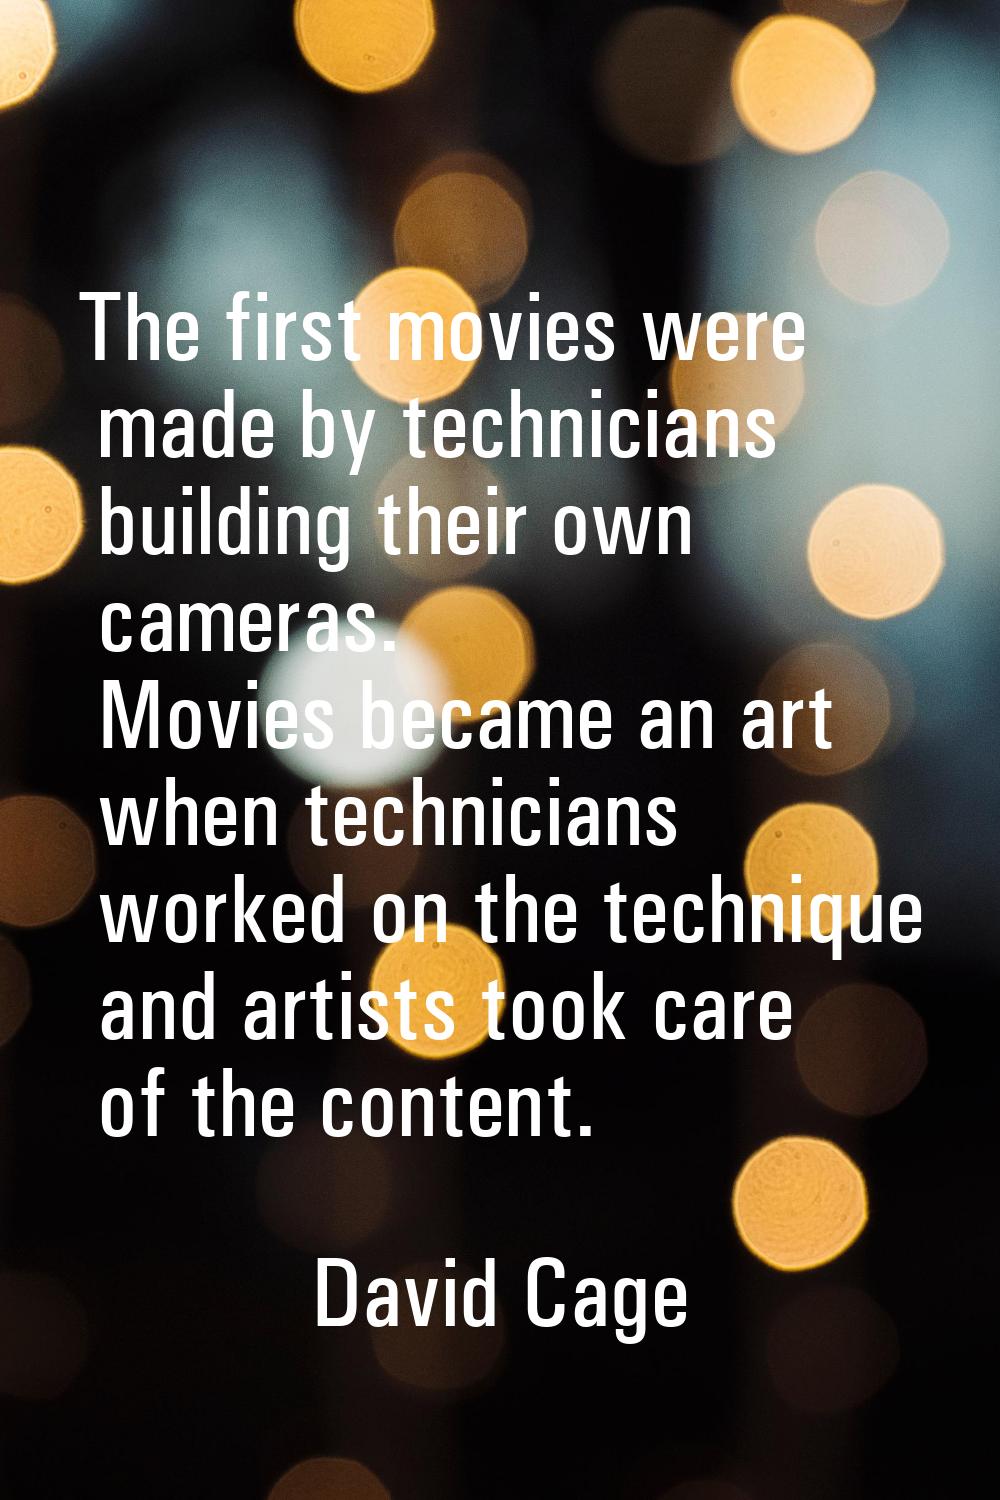 The first movies were made by technicians building their own cameras. Movies became an art when tec